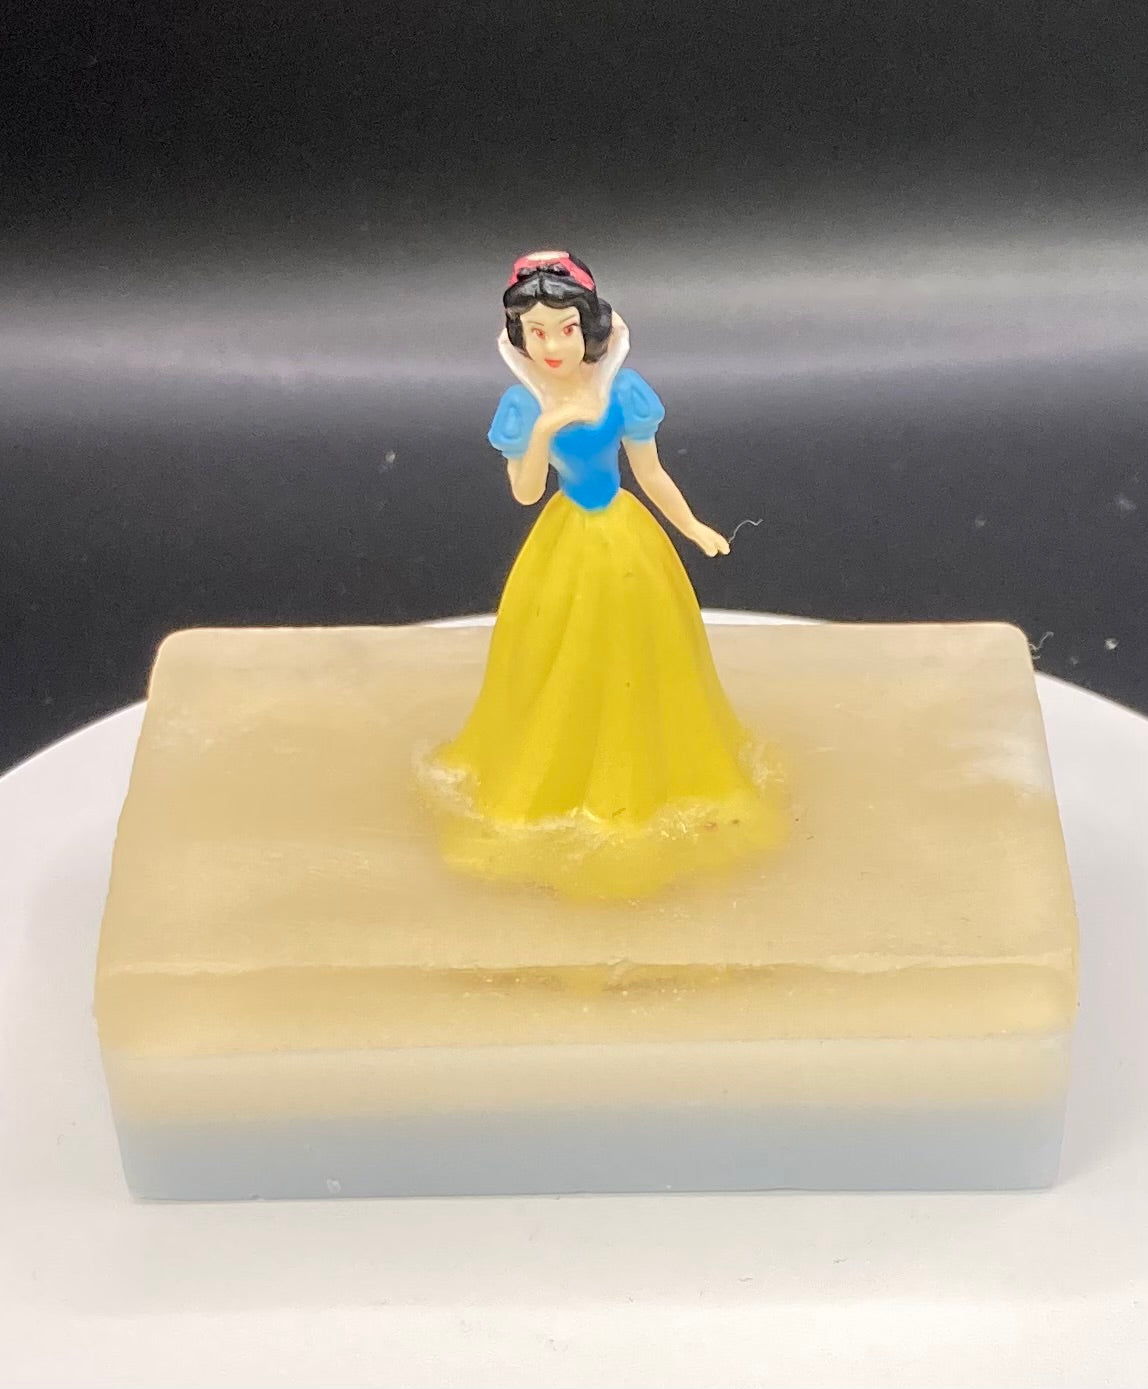 Snow White Toy on a Bar of Shea Butter and Glycerin Soap